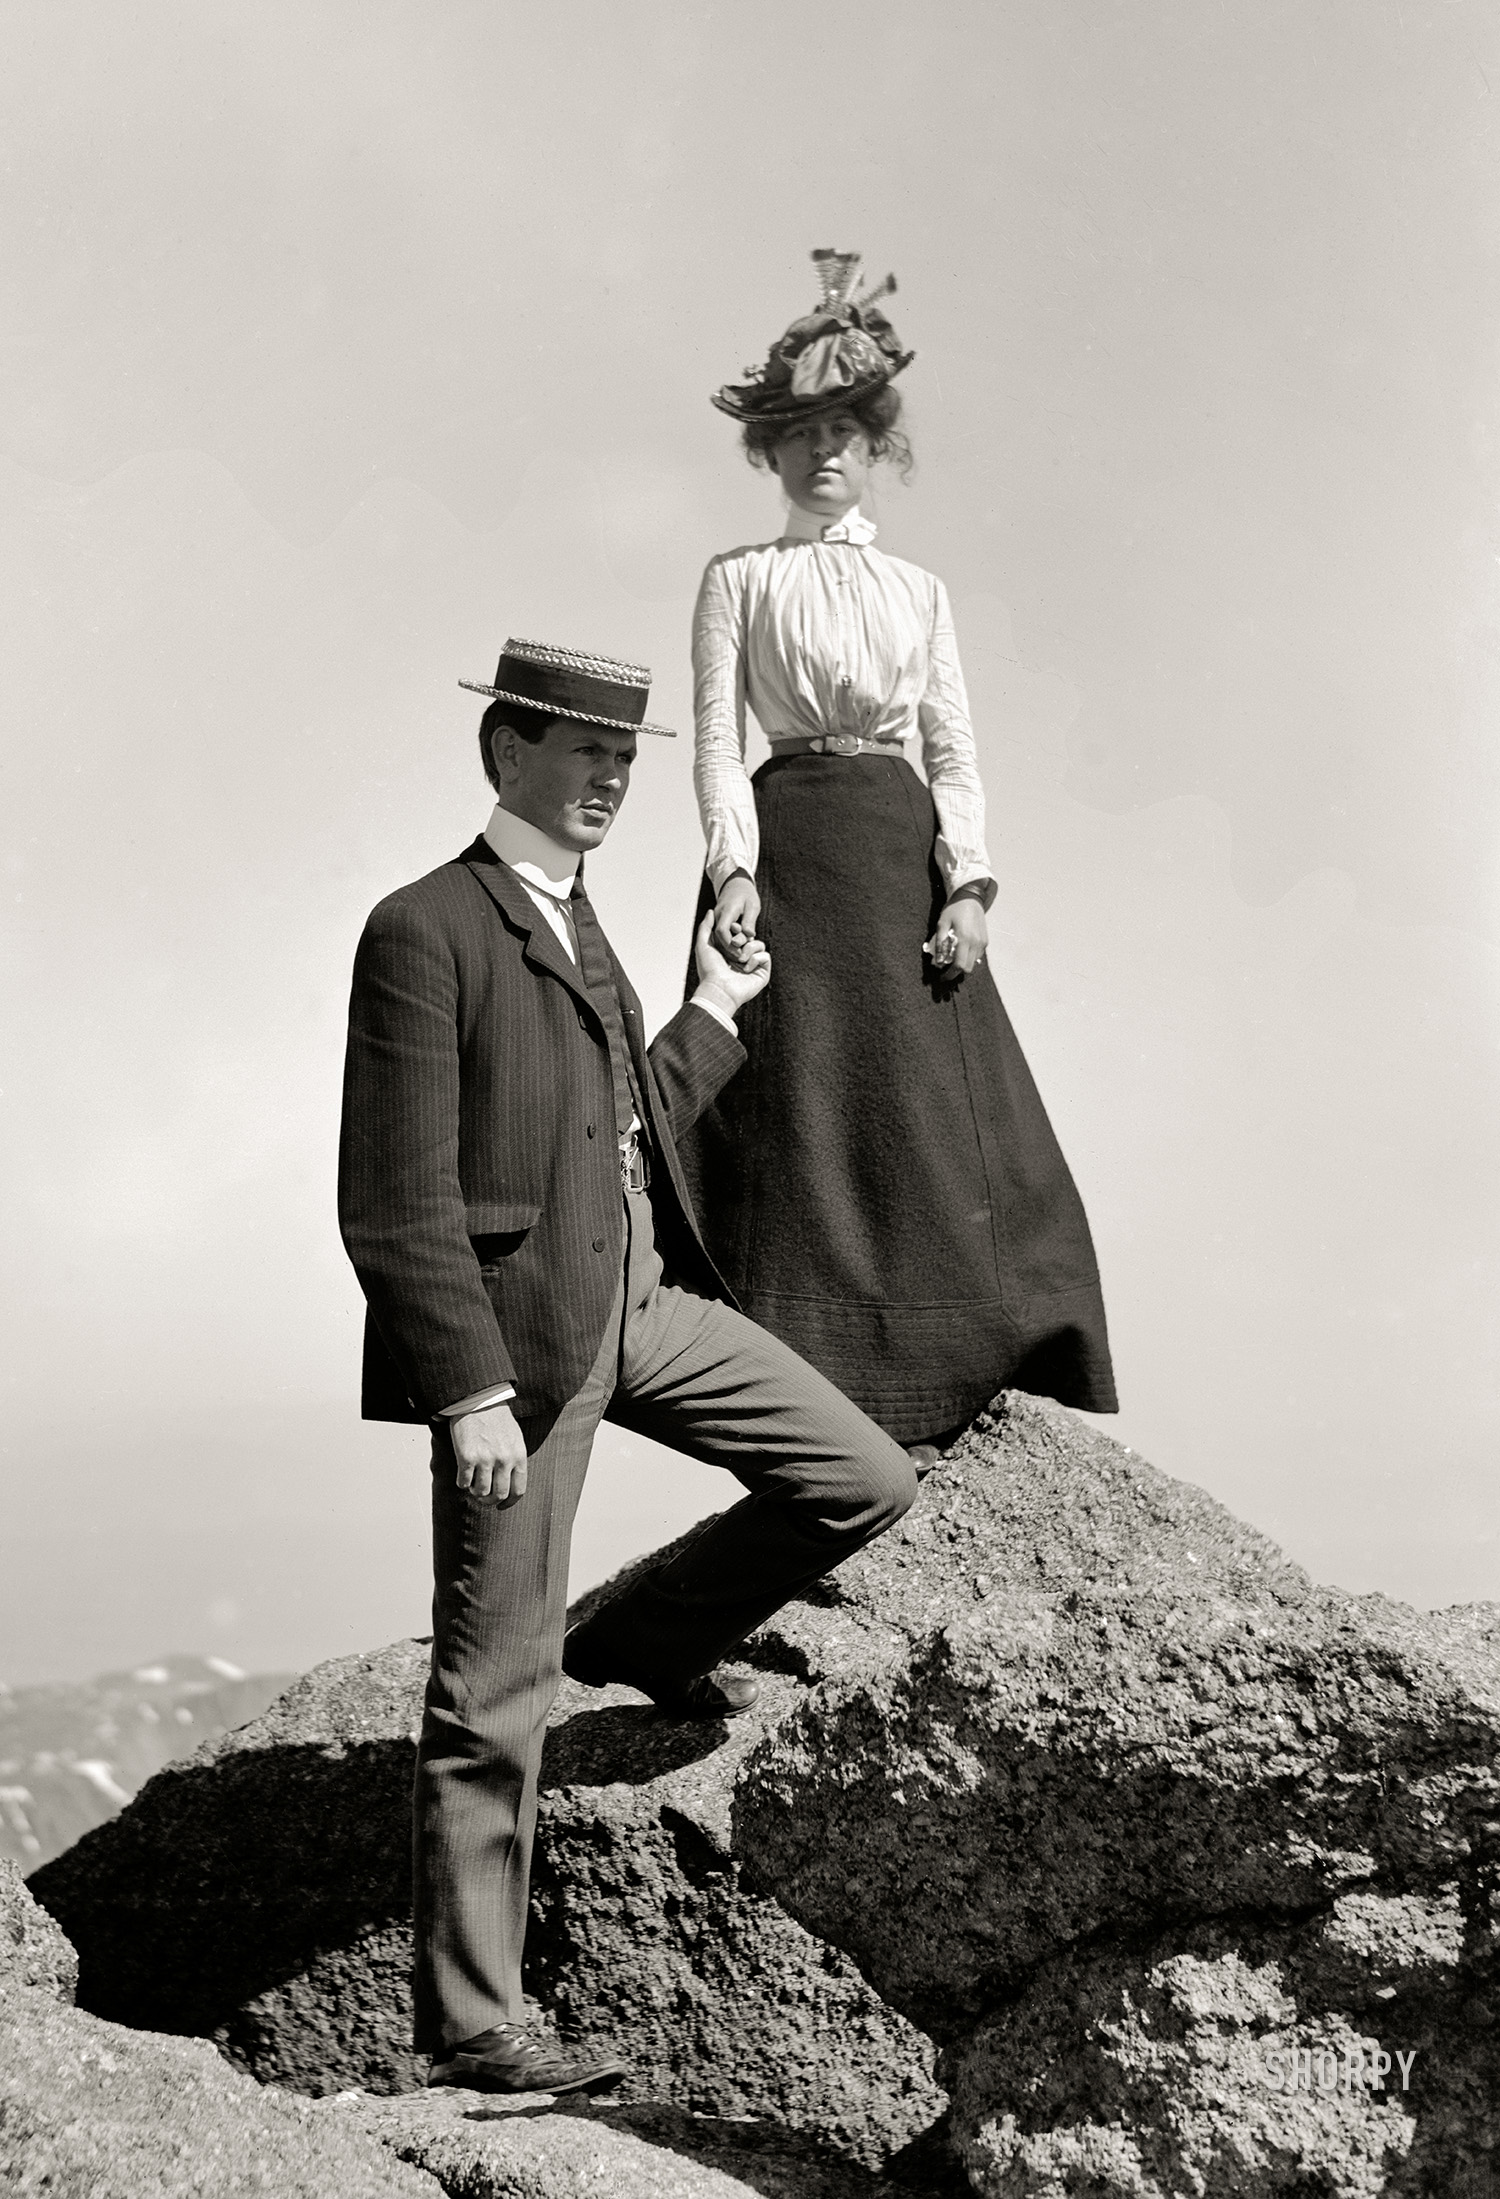 Somewhere mountainous circa 1910. "Young couple on rock holding hands, full-length portrait." 5x7 inch dry plate glass negative, Detroit Publishing Company. View full size.